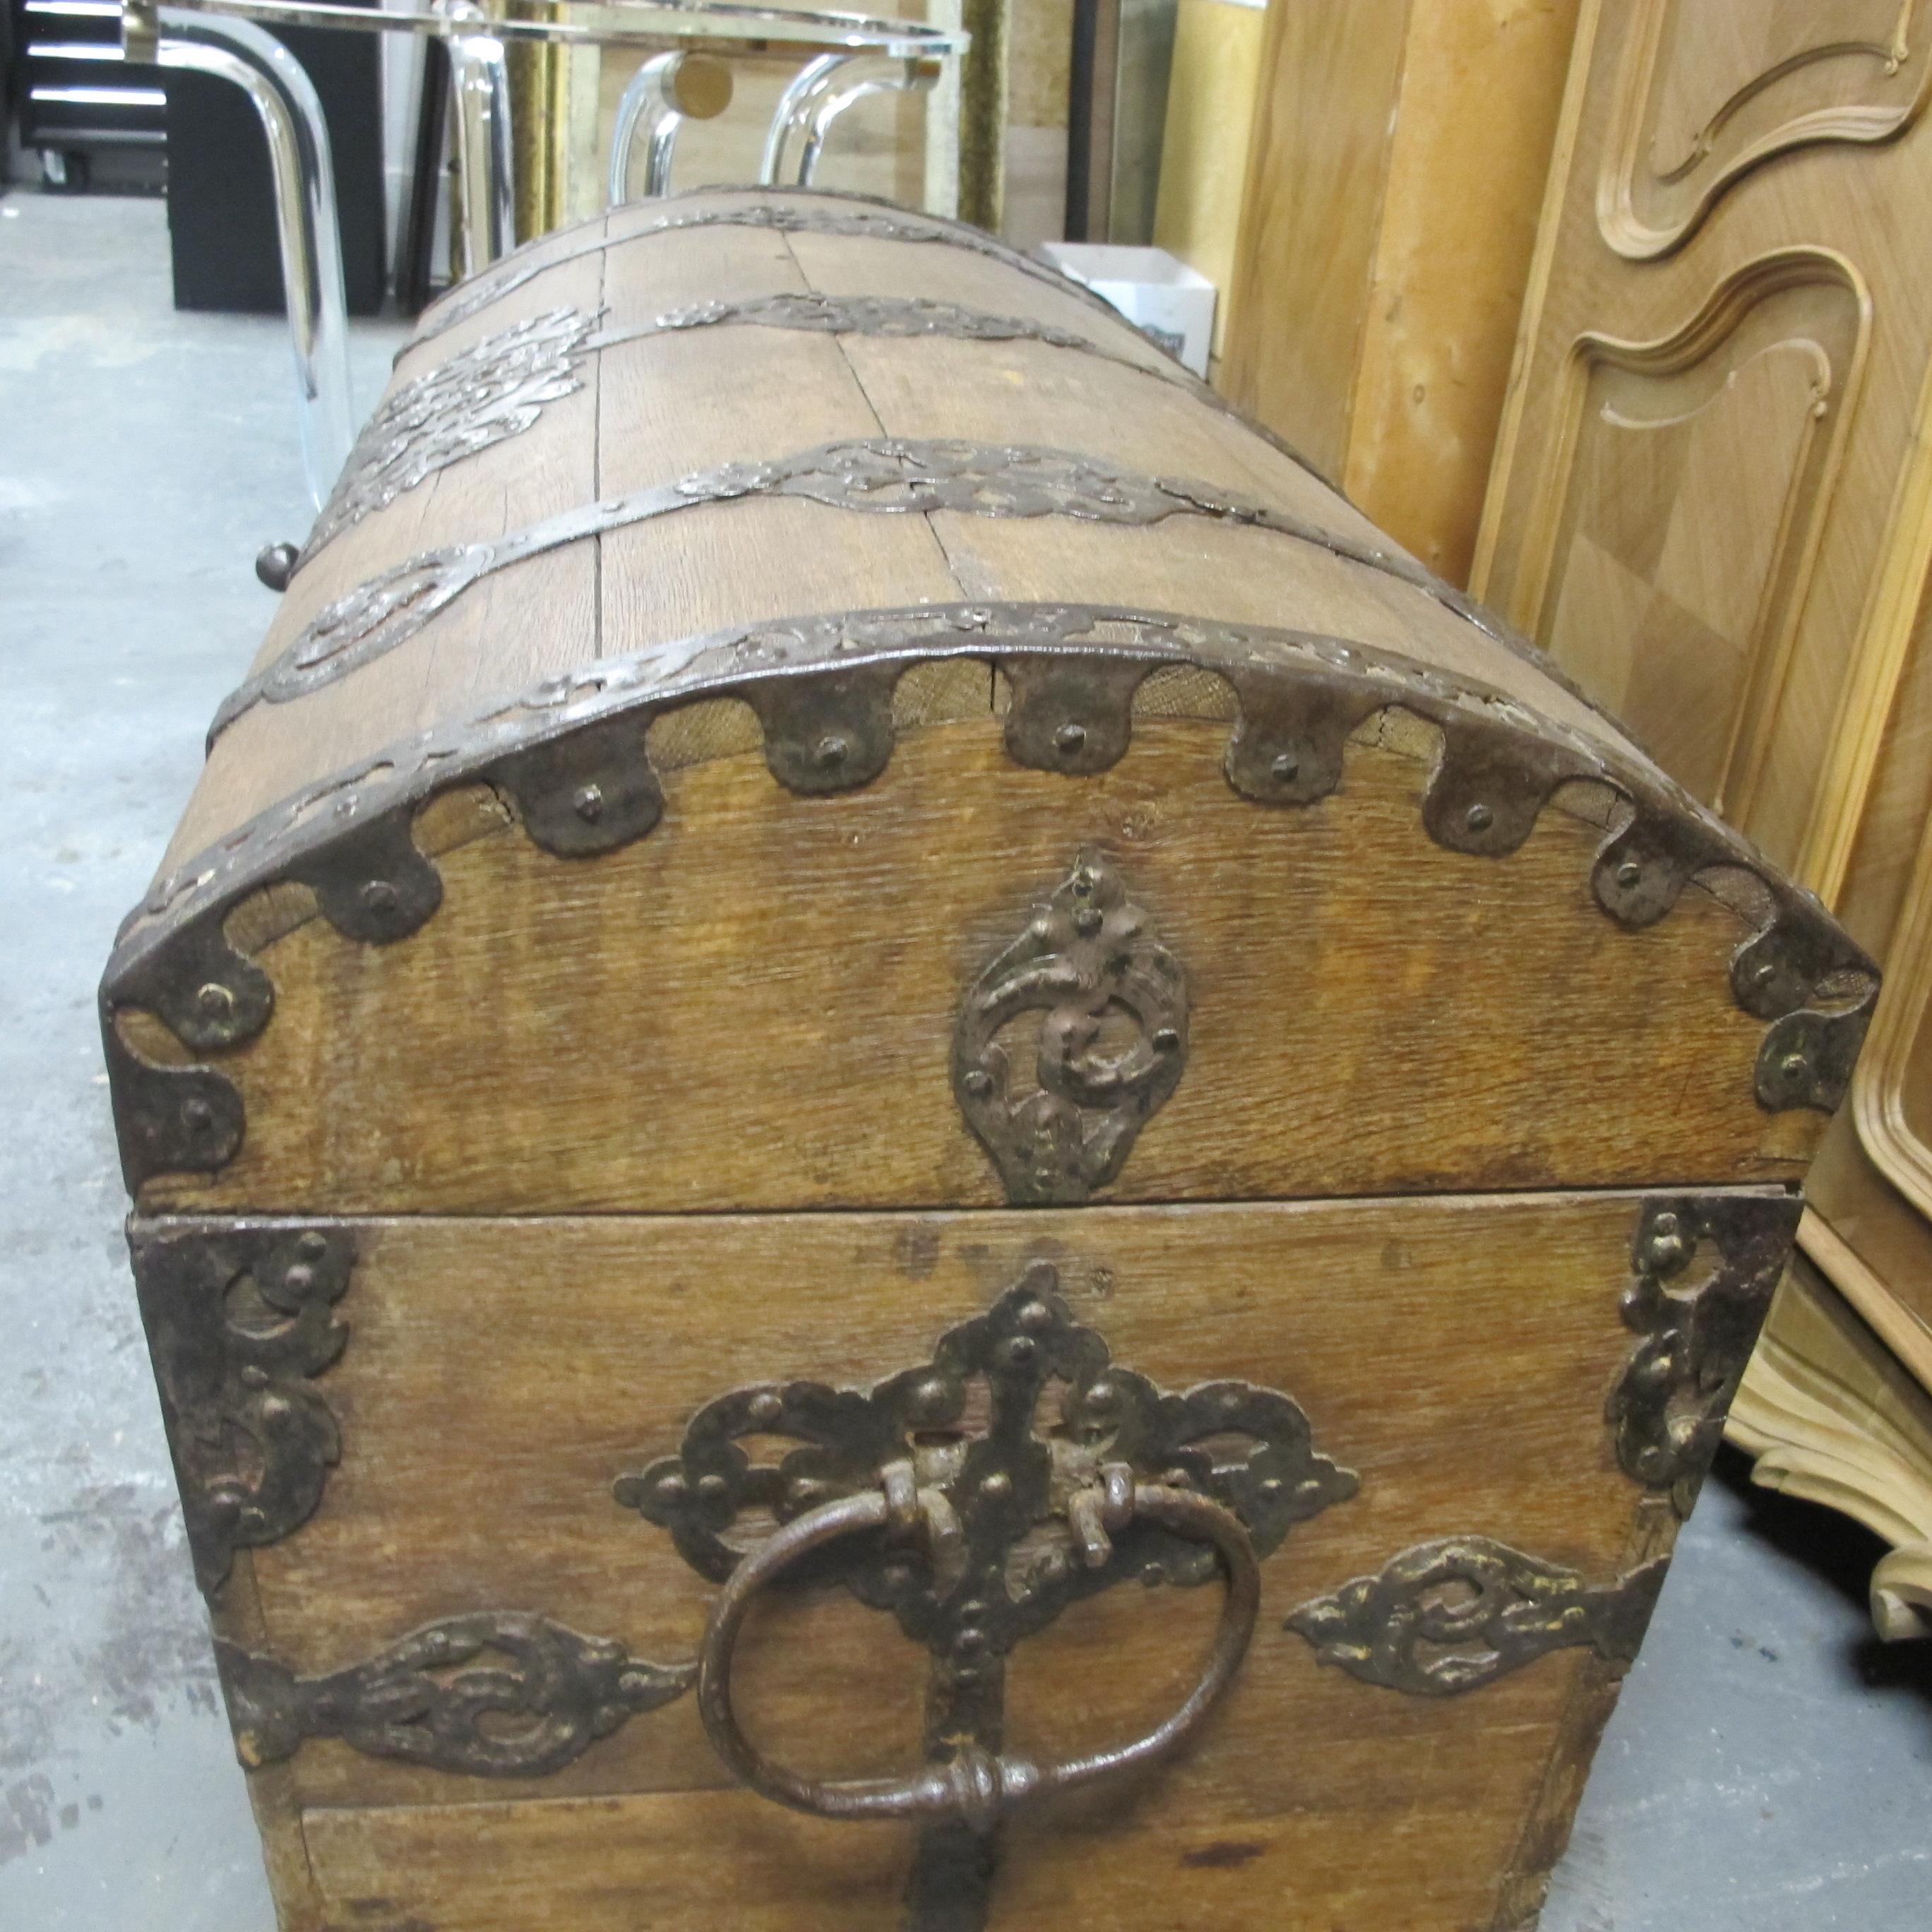 Antique 18th Century Trunk-Coffer with Dome Top and Ornate Metal Work 5